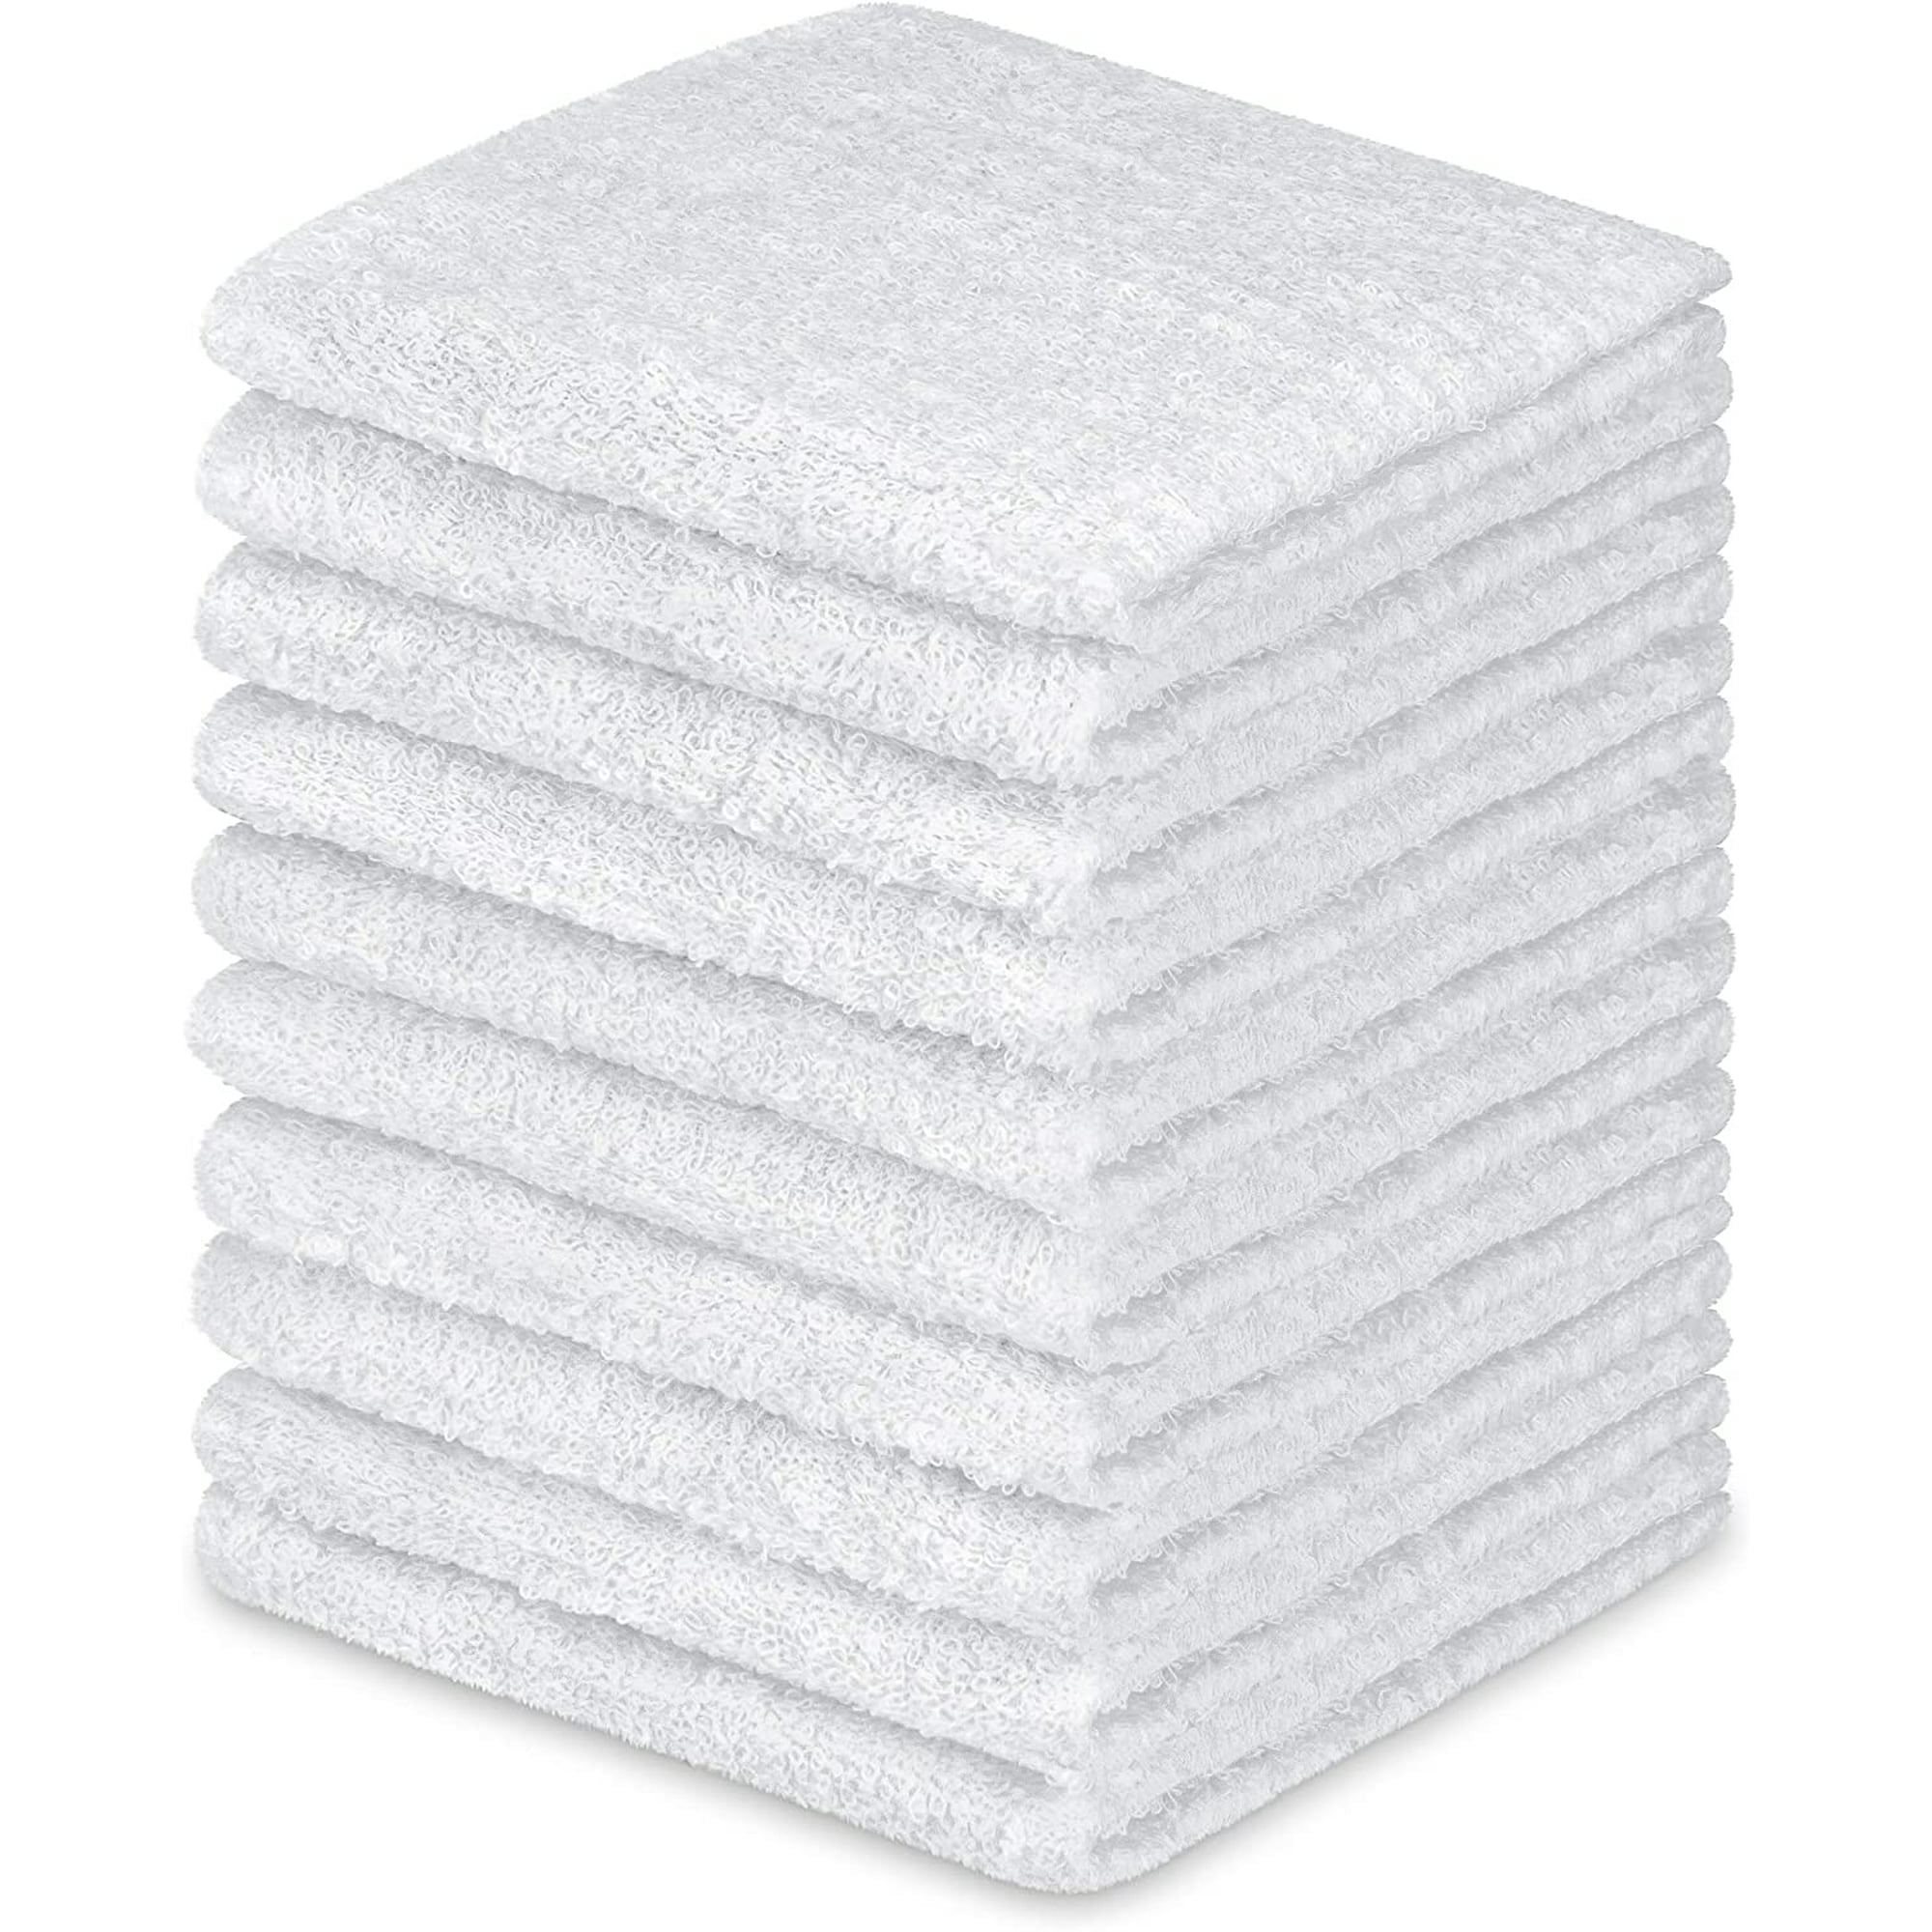 Wash Clothes 100 % Cotton - Soft and Absorbent - 12x12 Inch - 48 Pack -  White